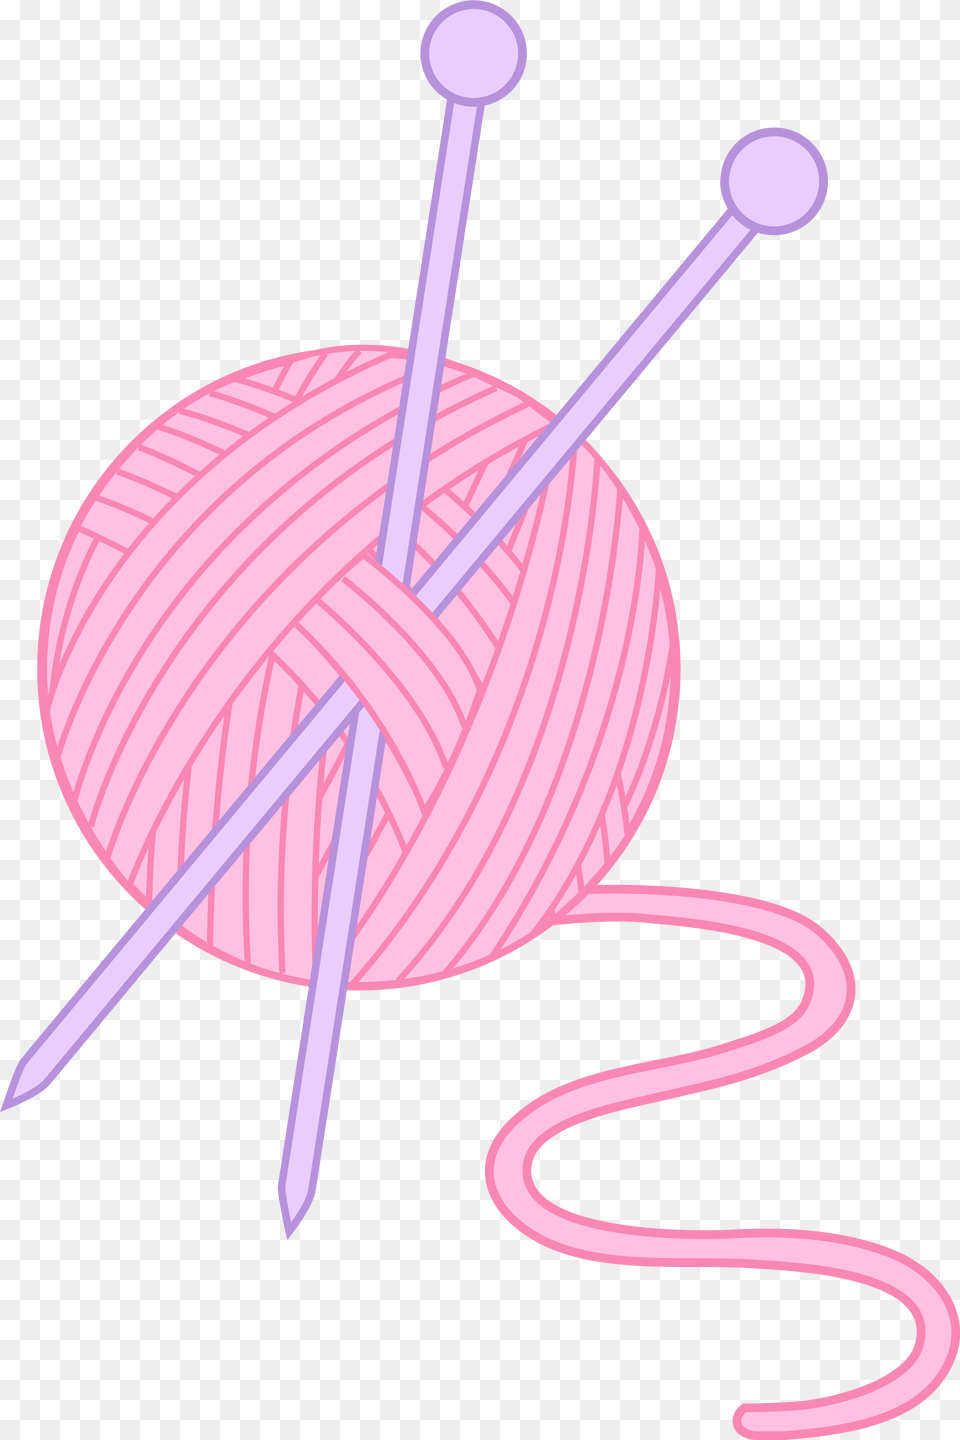 Download Pink Line Needle Knitting Yarn Hd Free Hq Knitting Needle Clipart, Food, Sweets Png Image